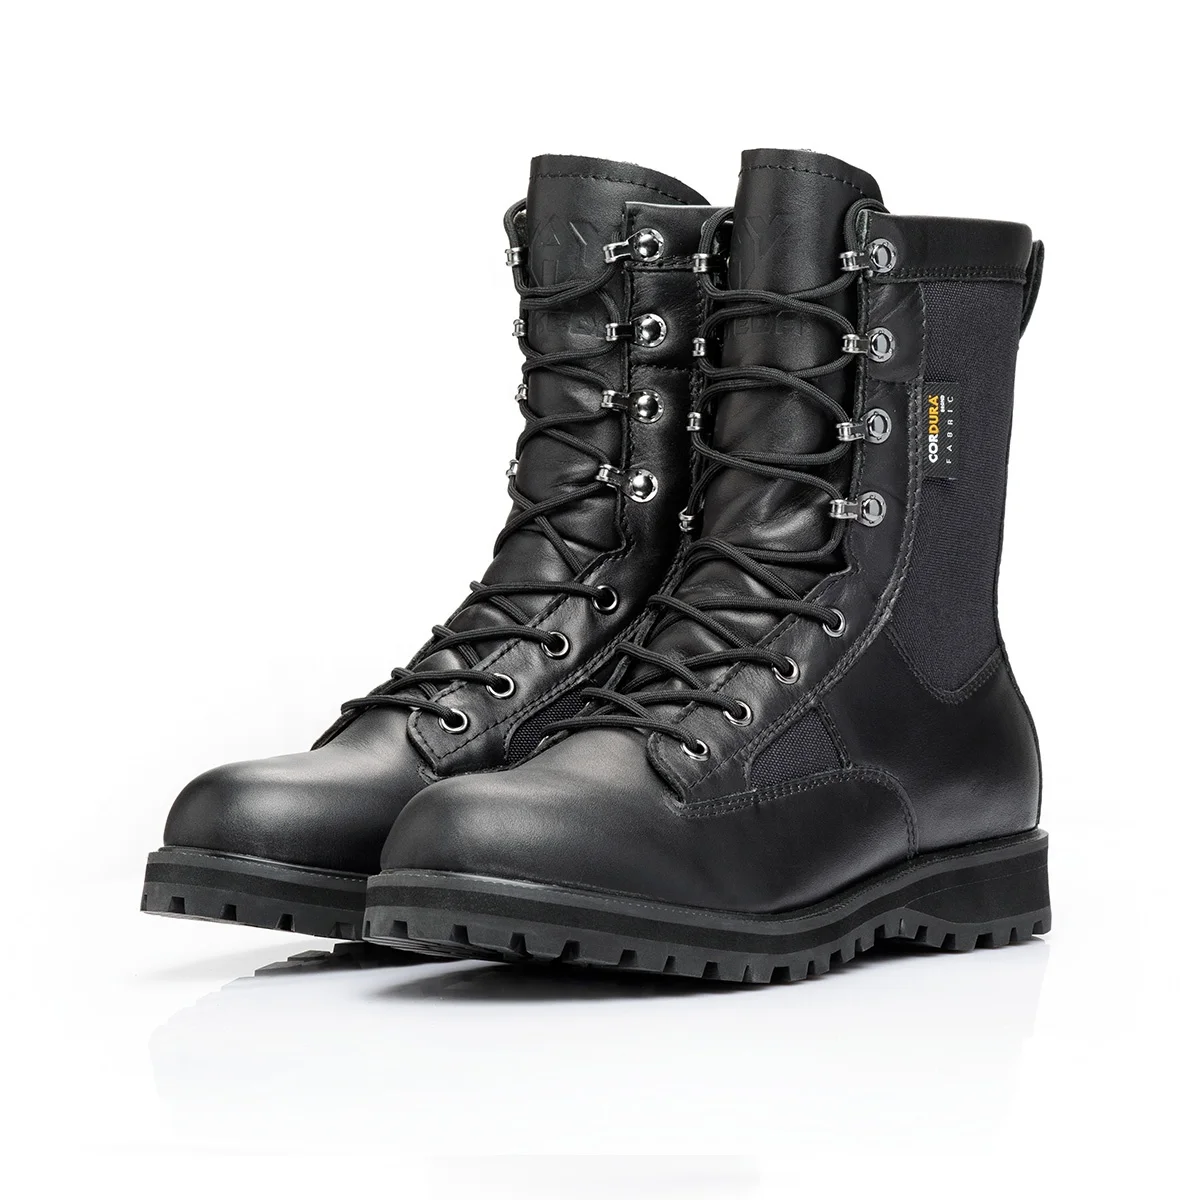 YAKEDA botas militar Black Waterproof Hiking Hunting Army Combat Composite Safety Toe Military Tactical Boots For Men